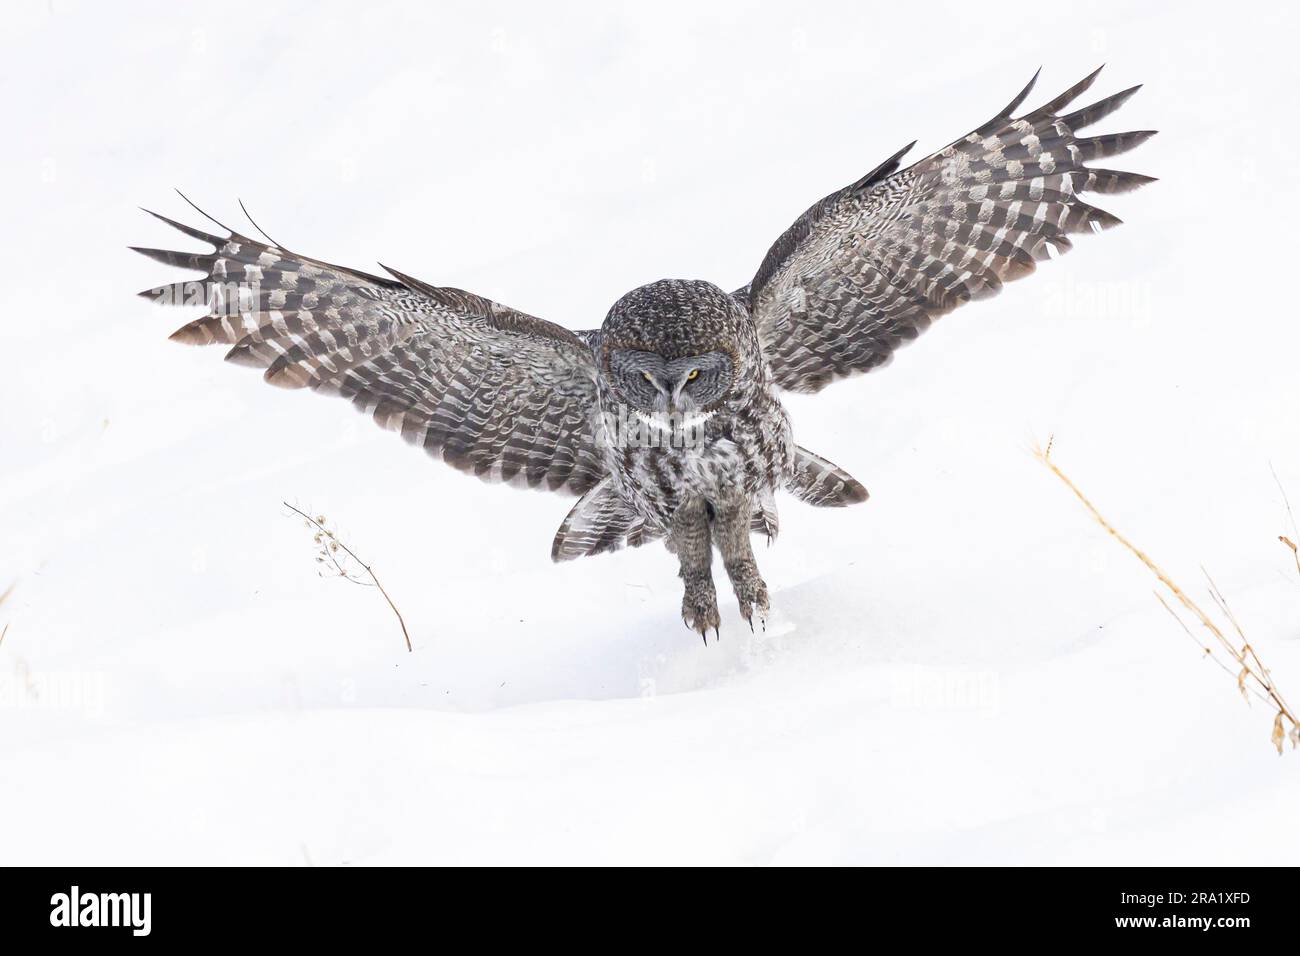 A great gray owl diving after prey in the snow of Bragg Creek Stock Photo